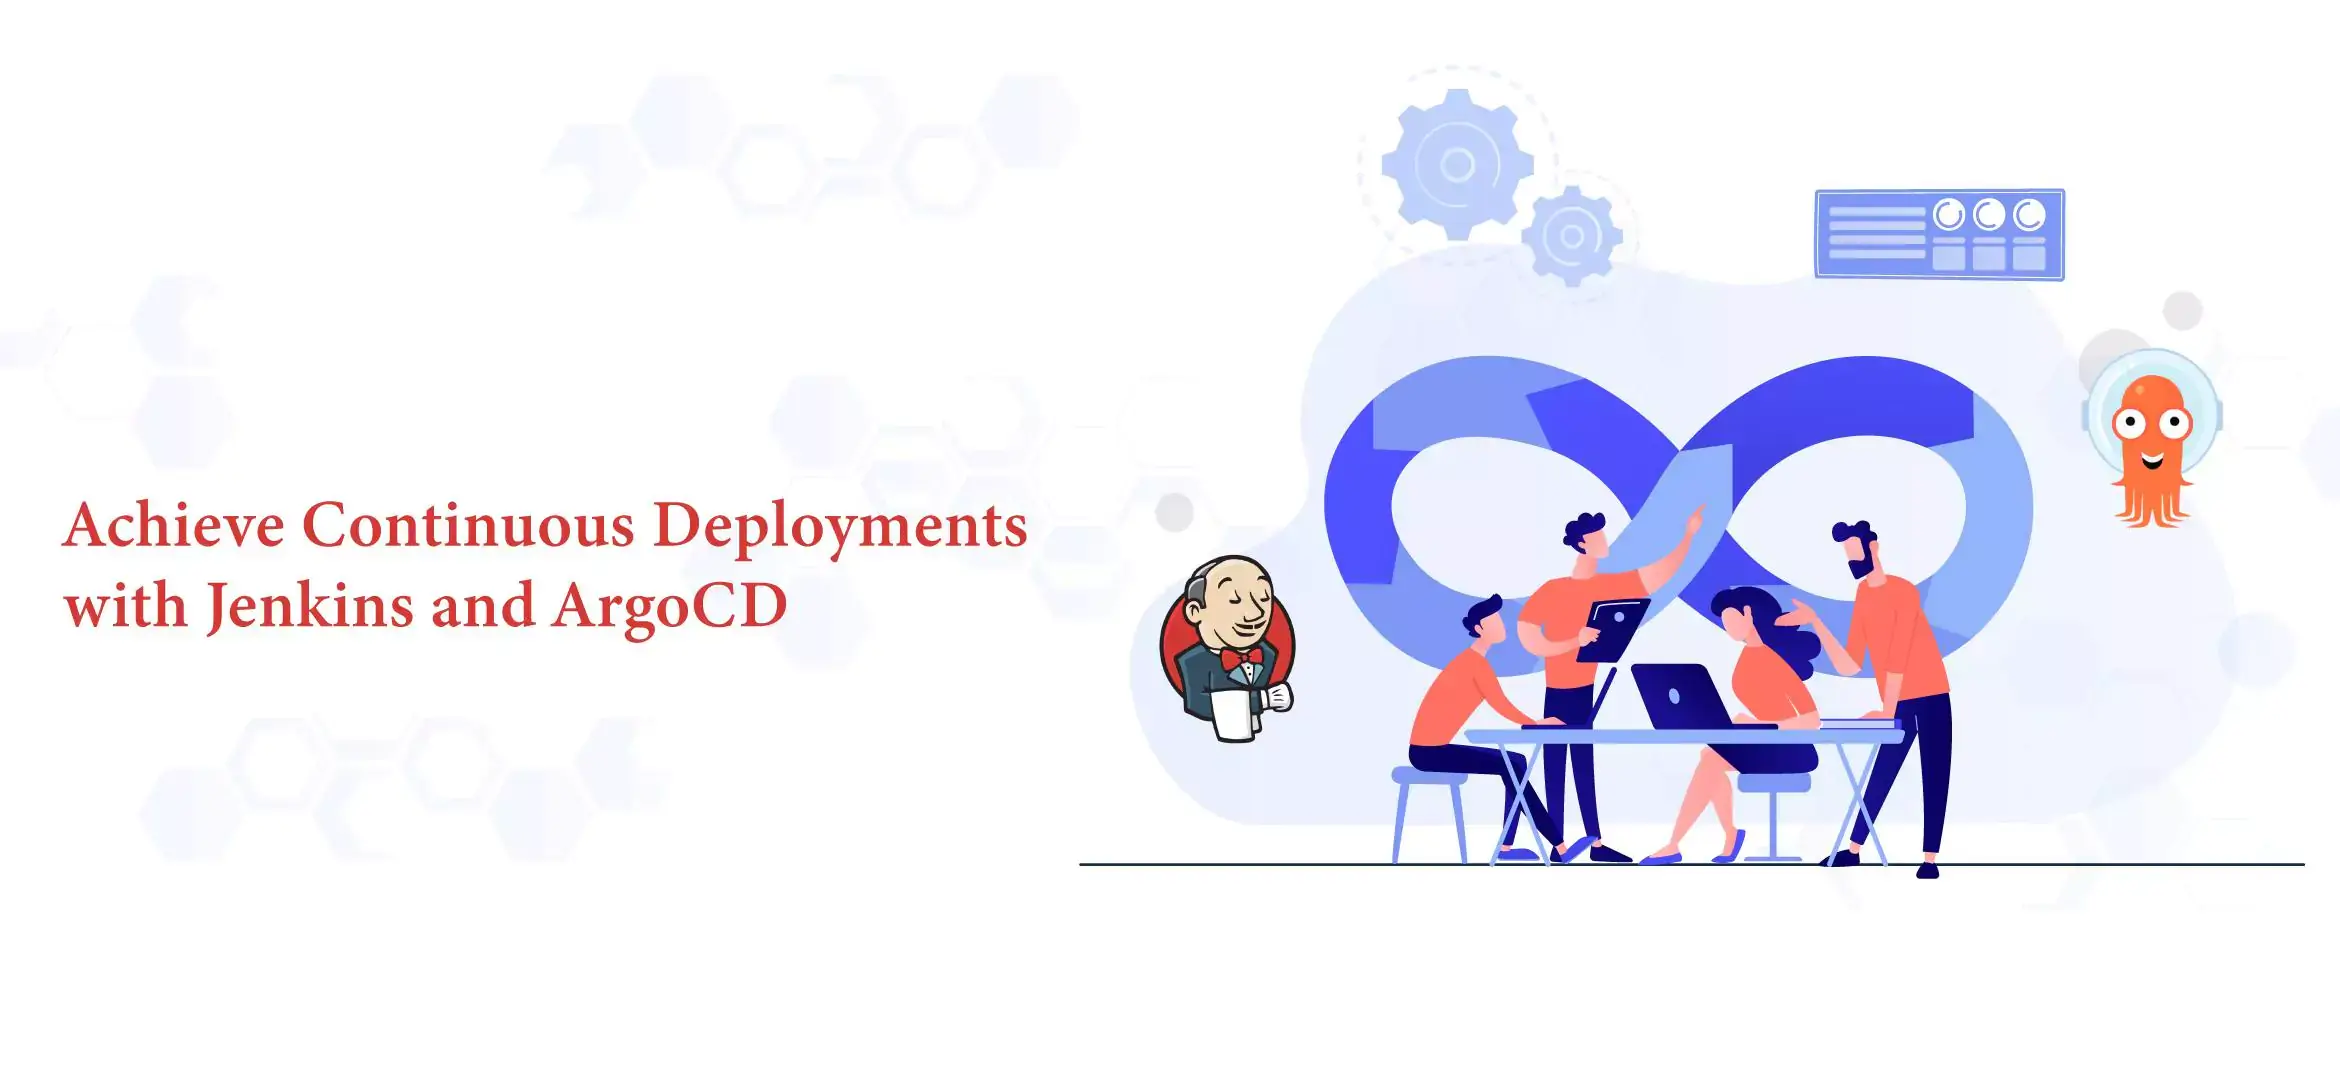 1709793921Continuous Deployments with Jenkins and ArgoCD.webp